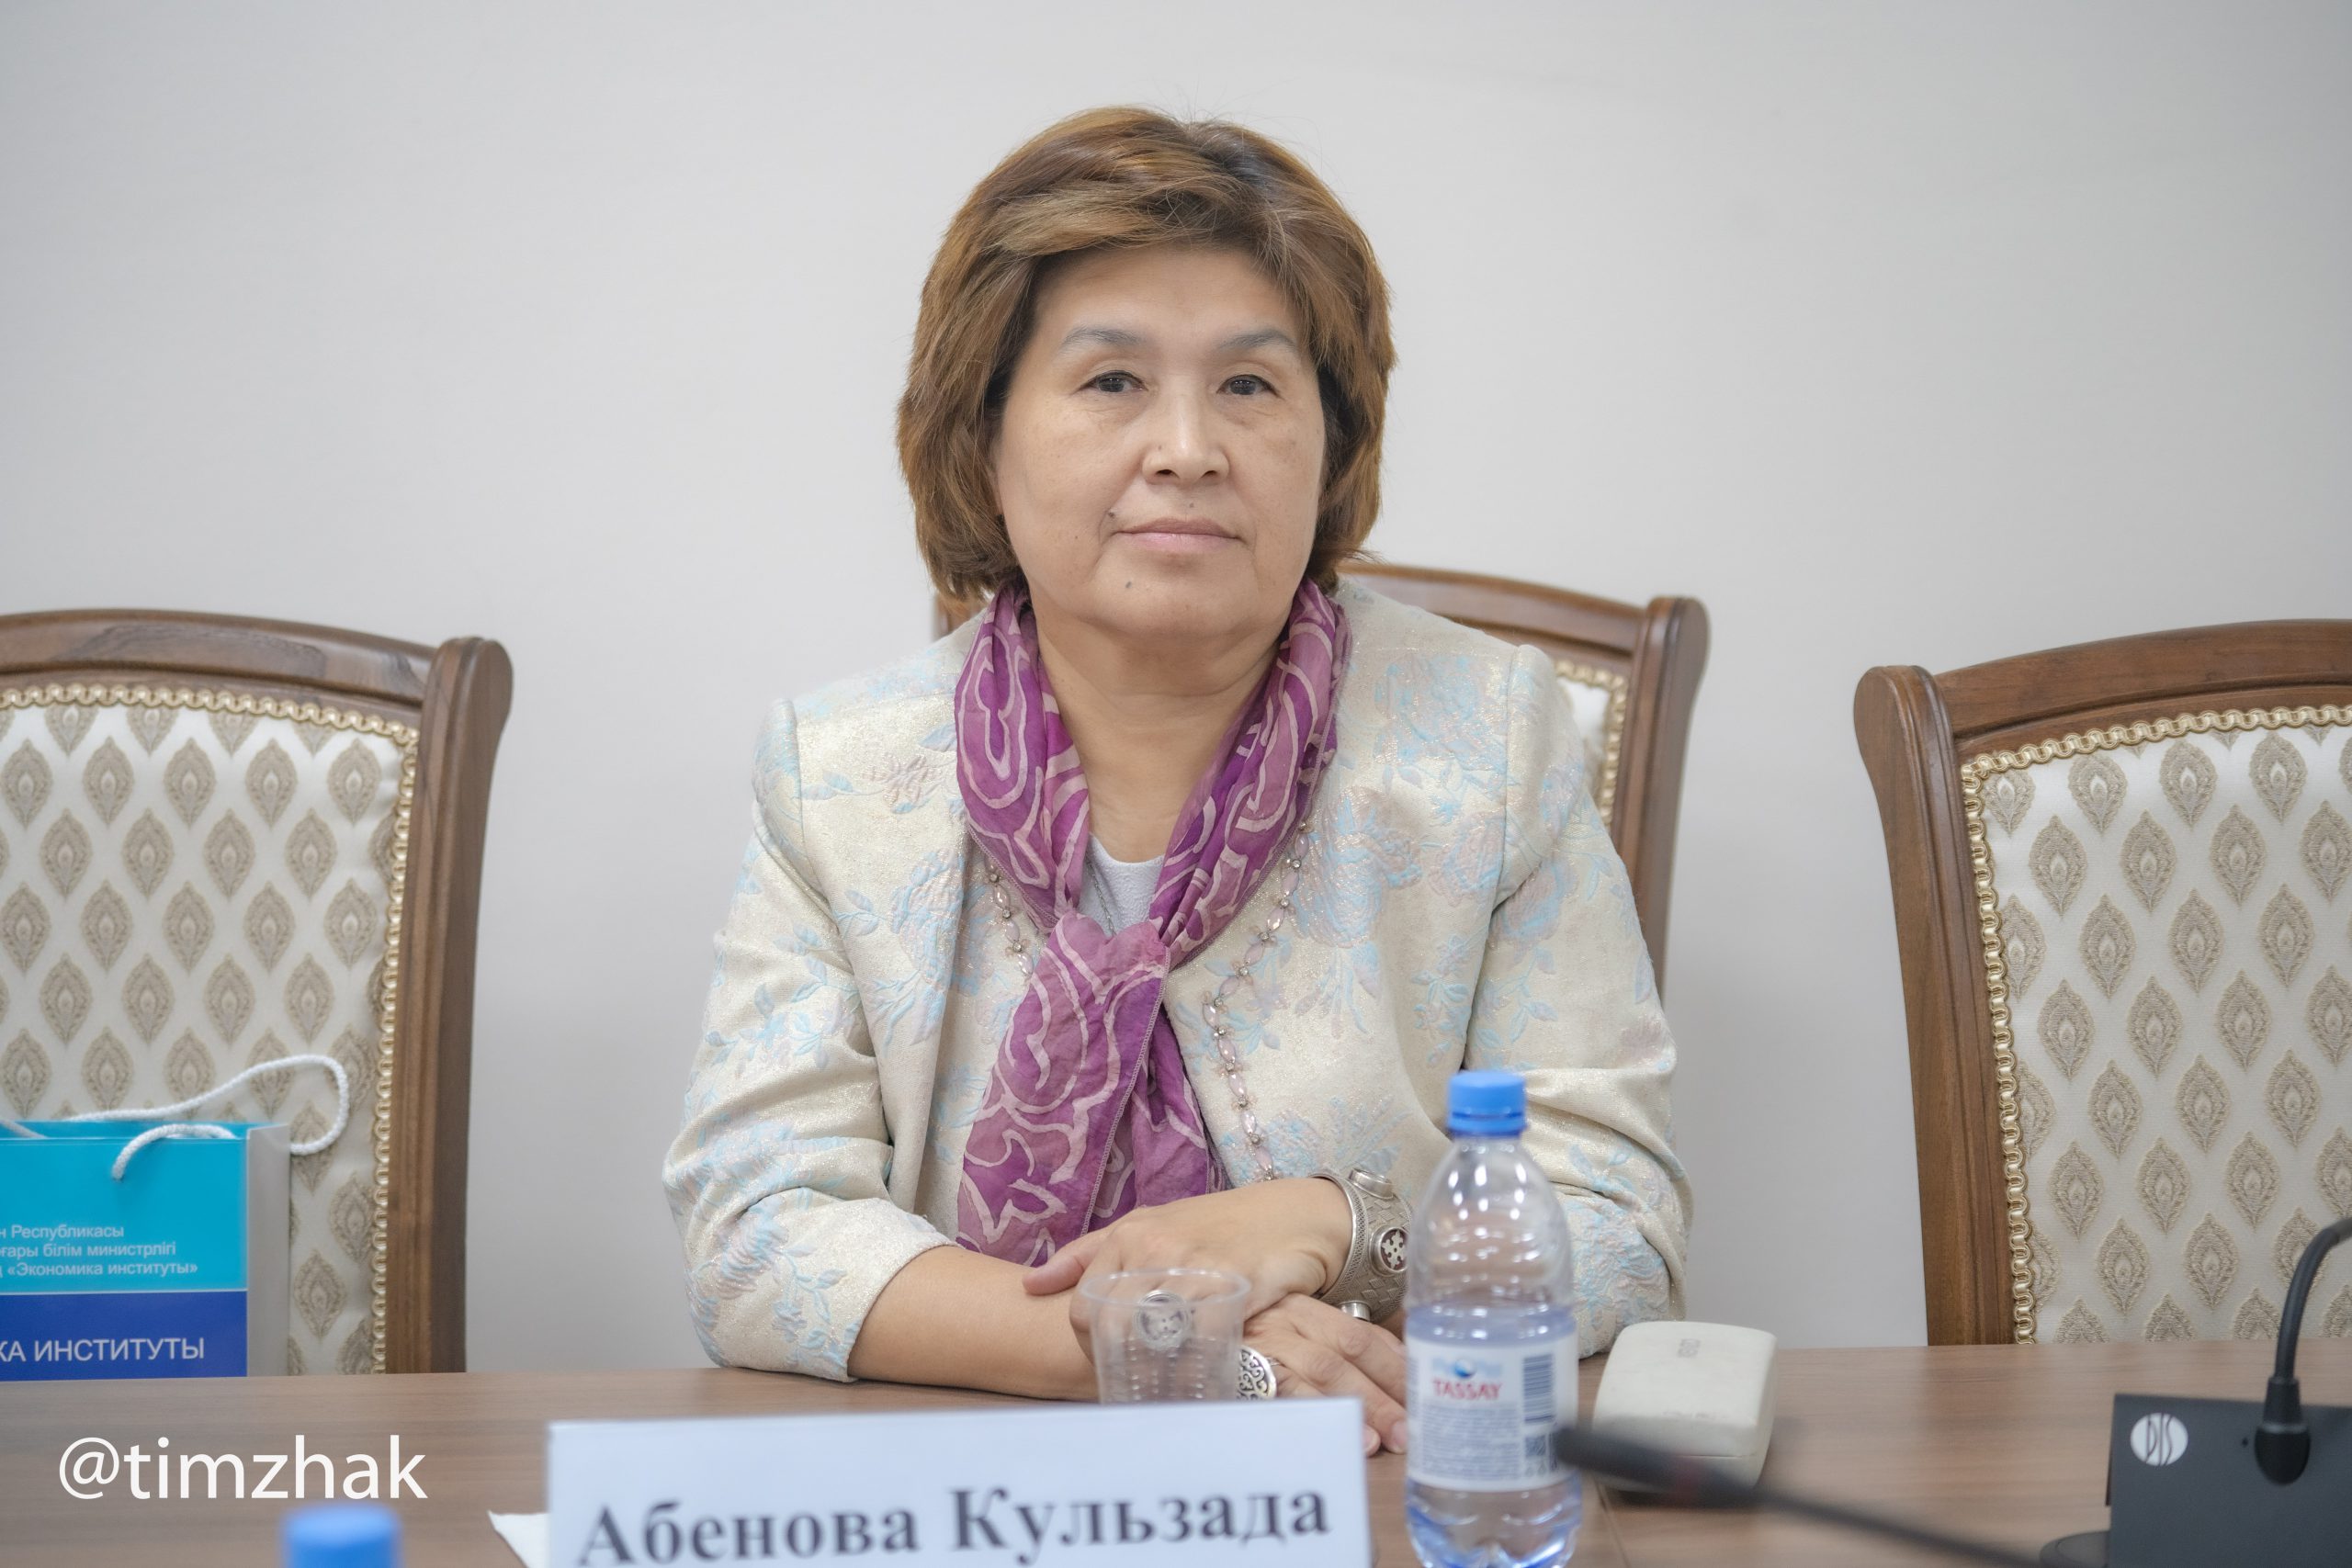 International Scientific and Practical Conference "Socio-demographic problems of modernity and the national interests of Kazakhstan"